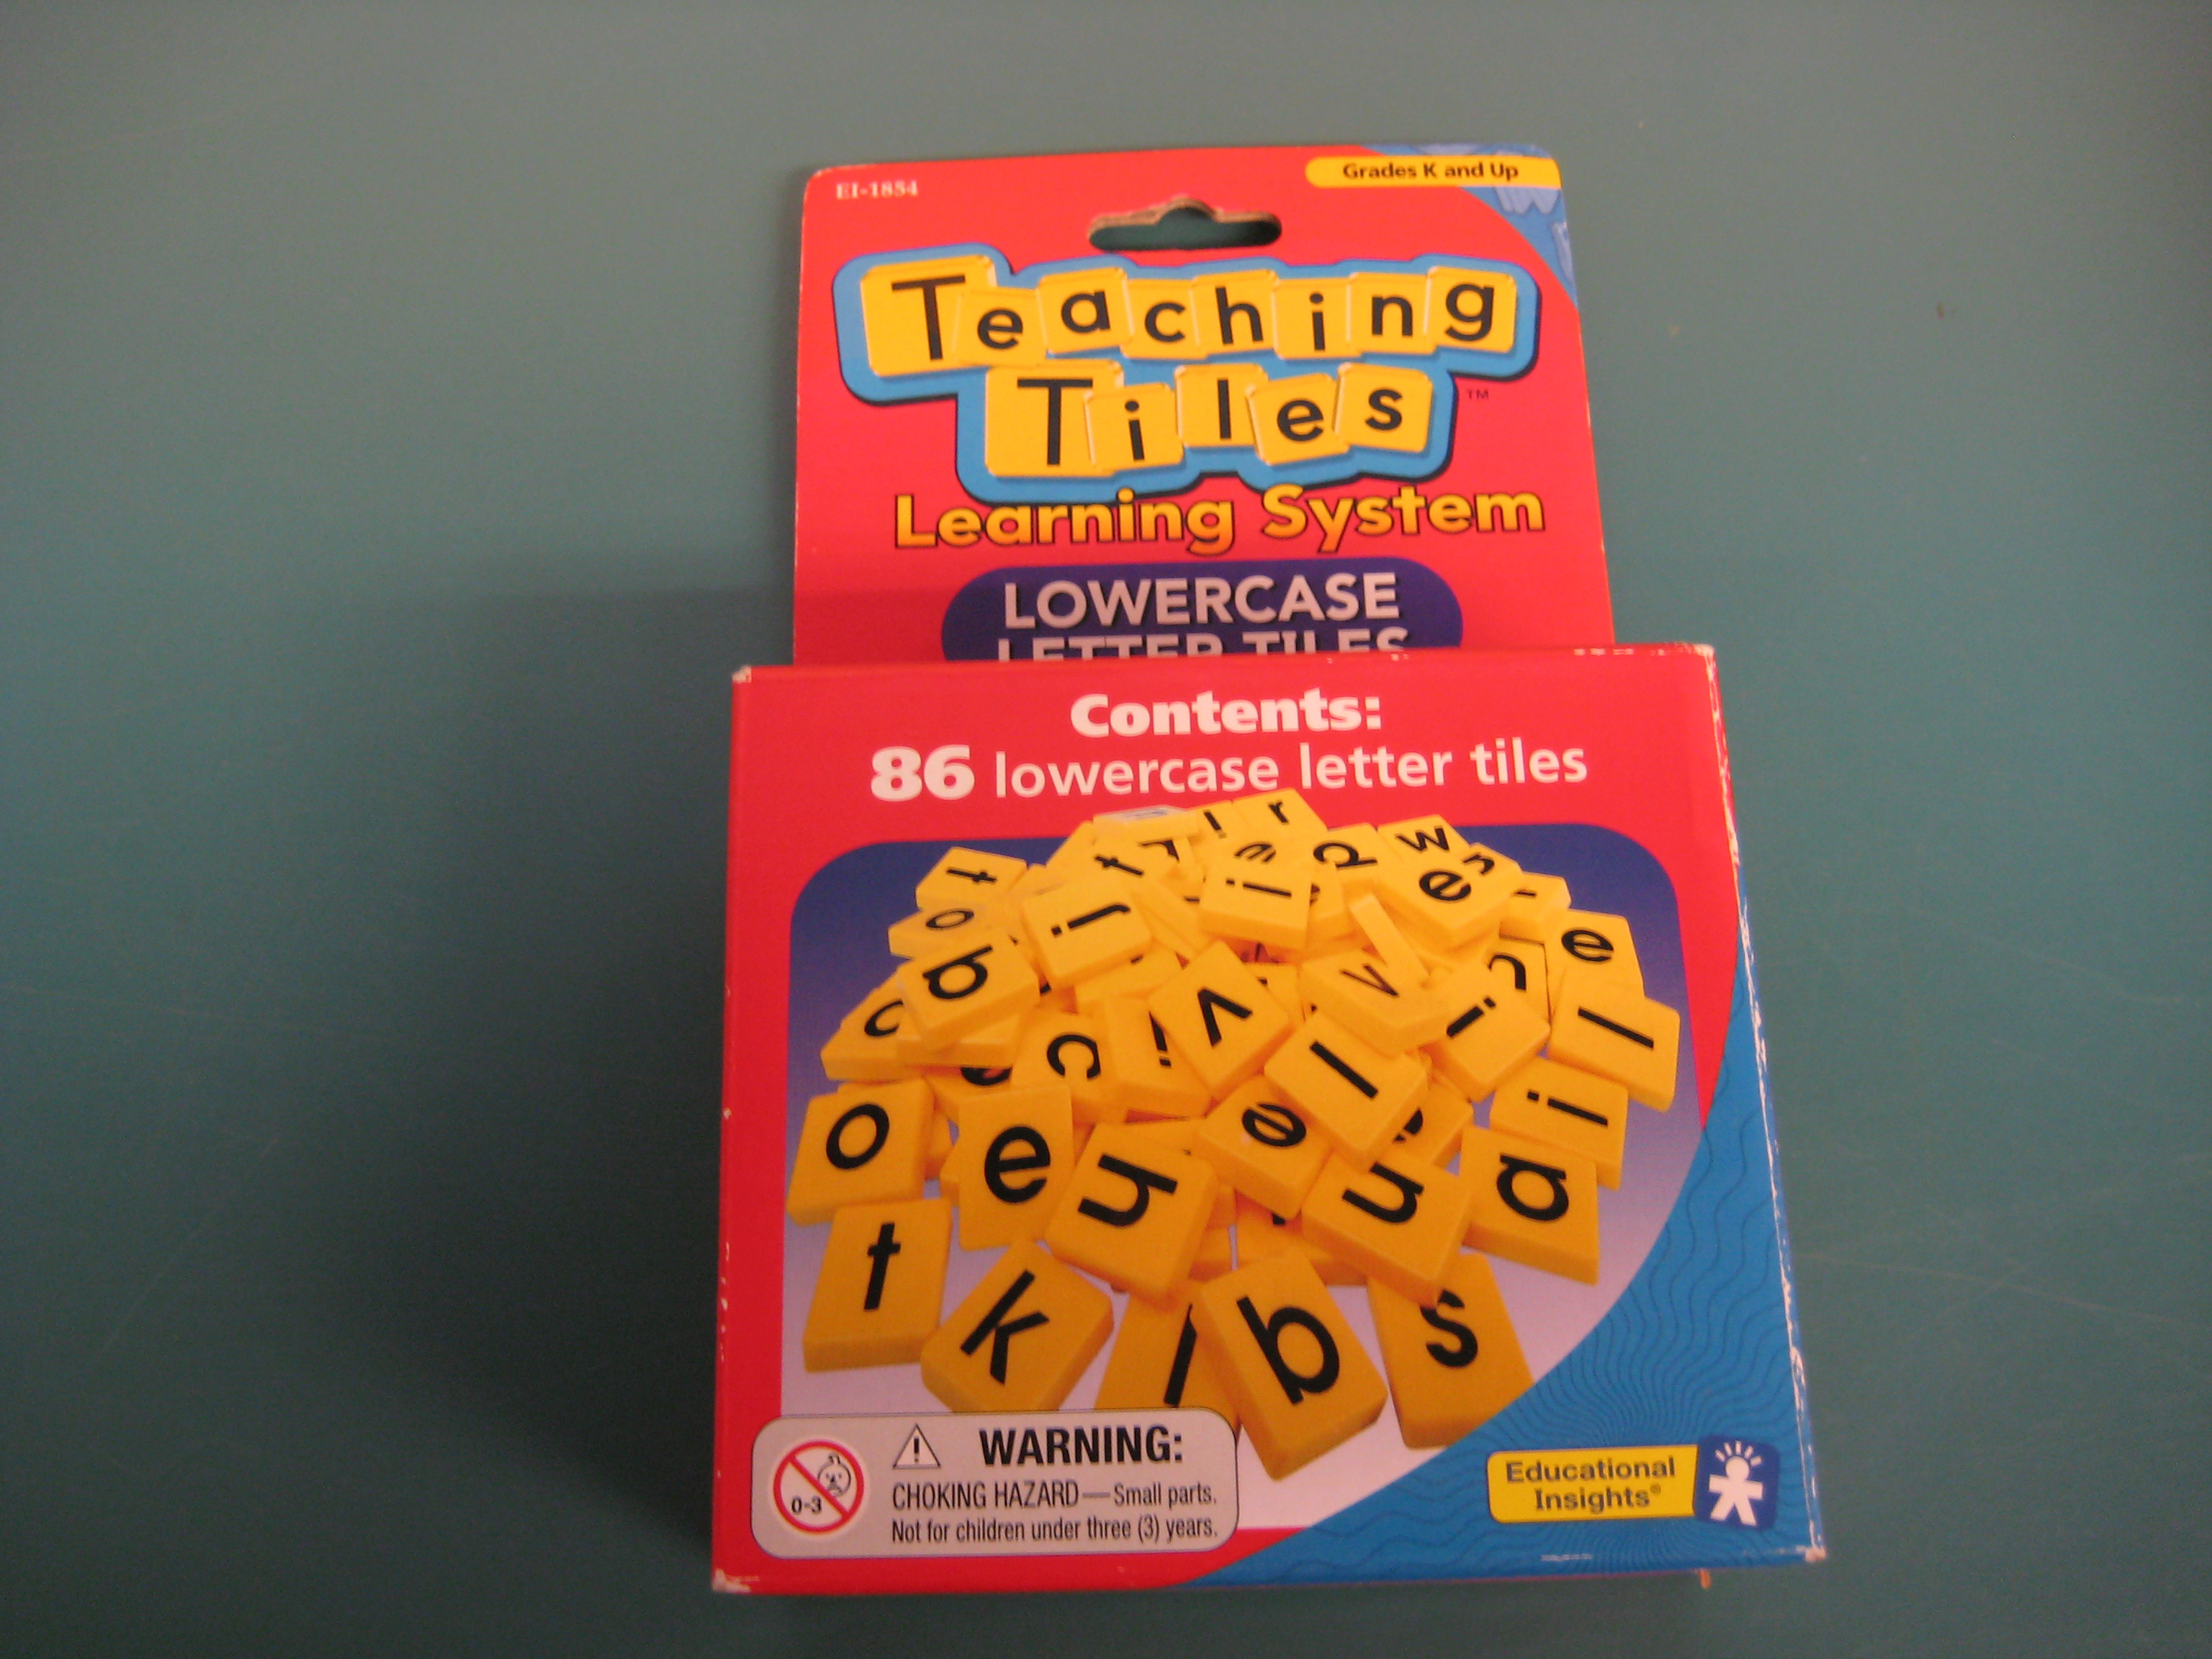 Words: Spelling, Letter Patterns - California Learning Resource